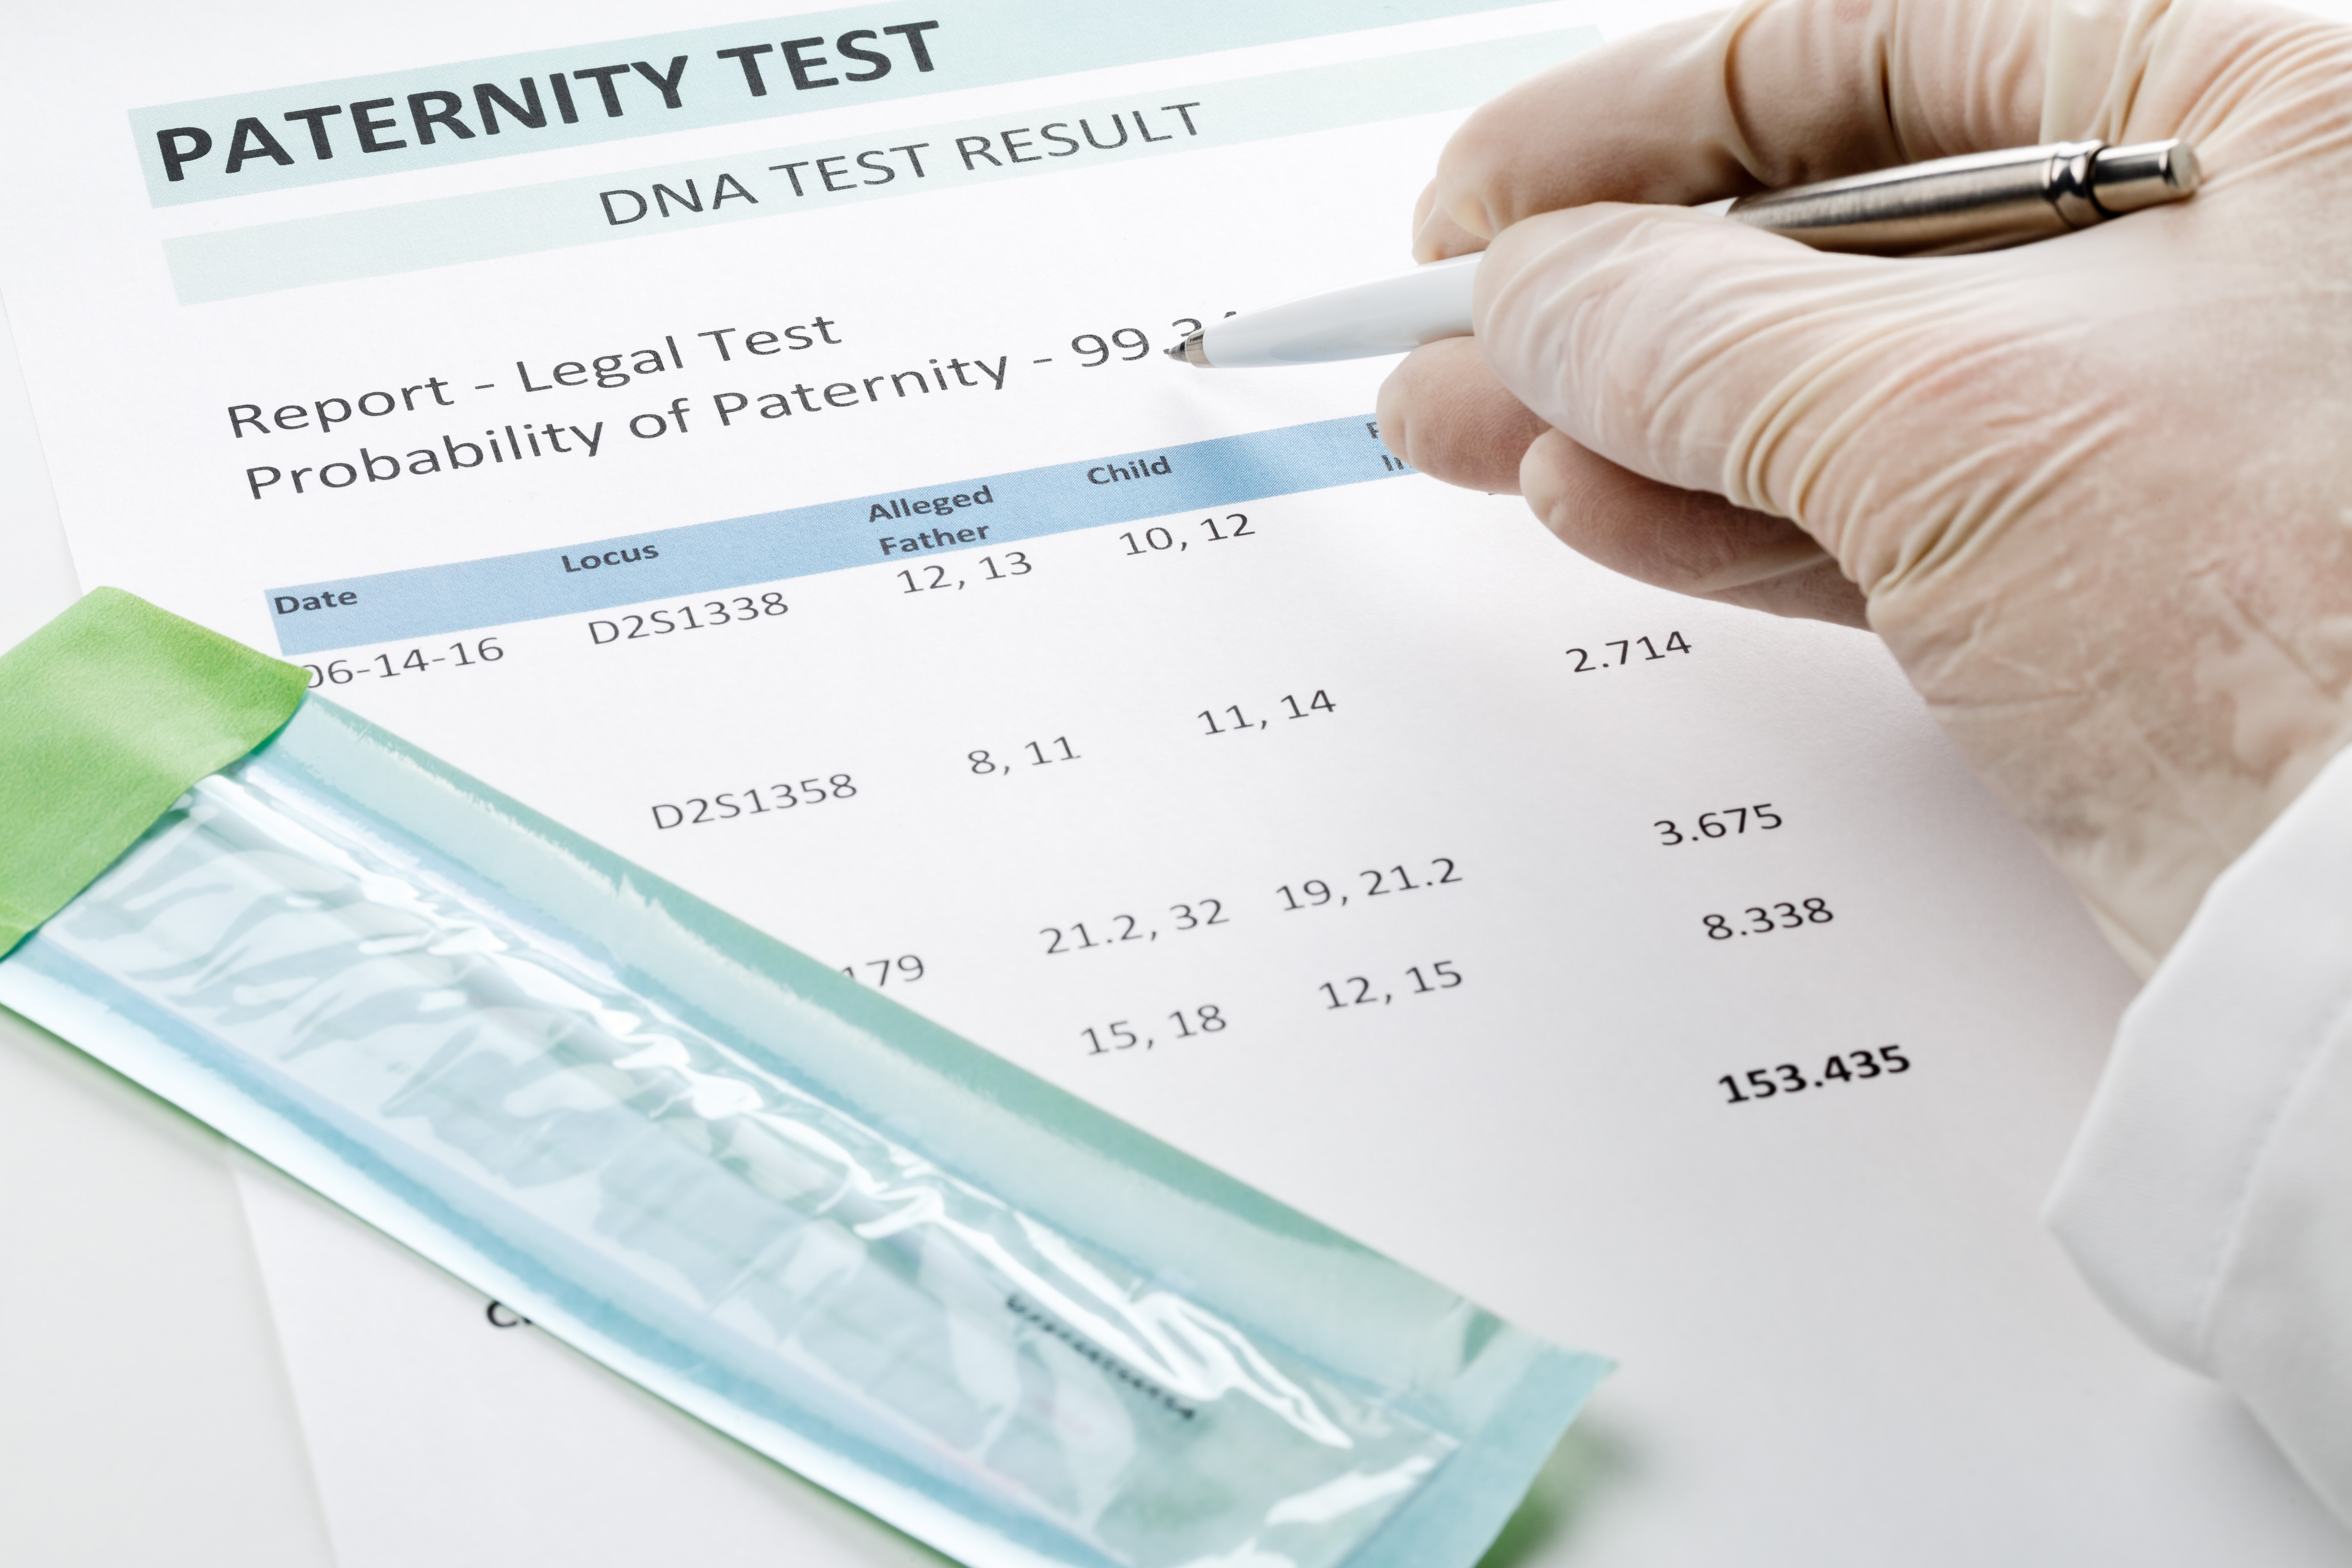 A professional studying a paternity test | Source: Shutterstock